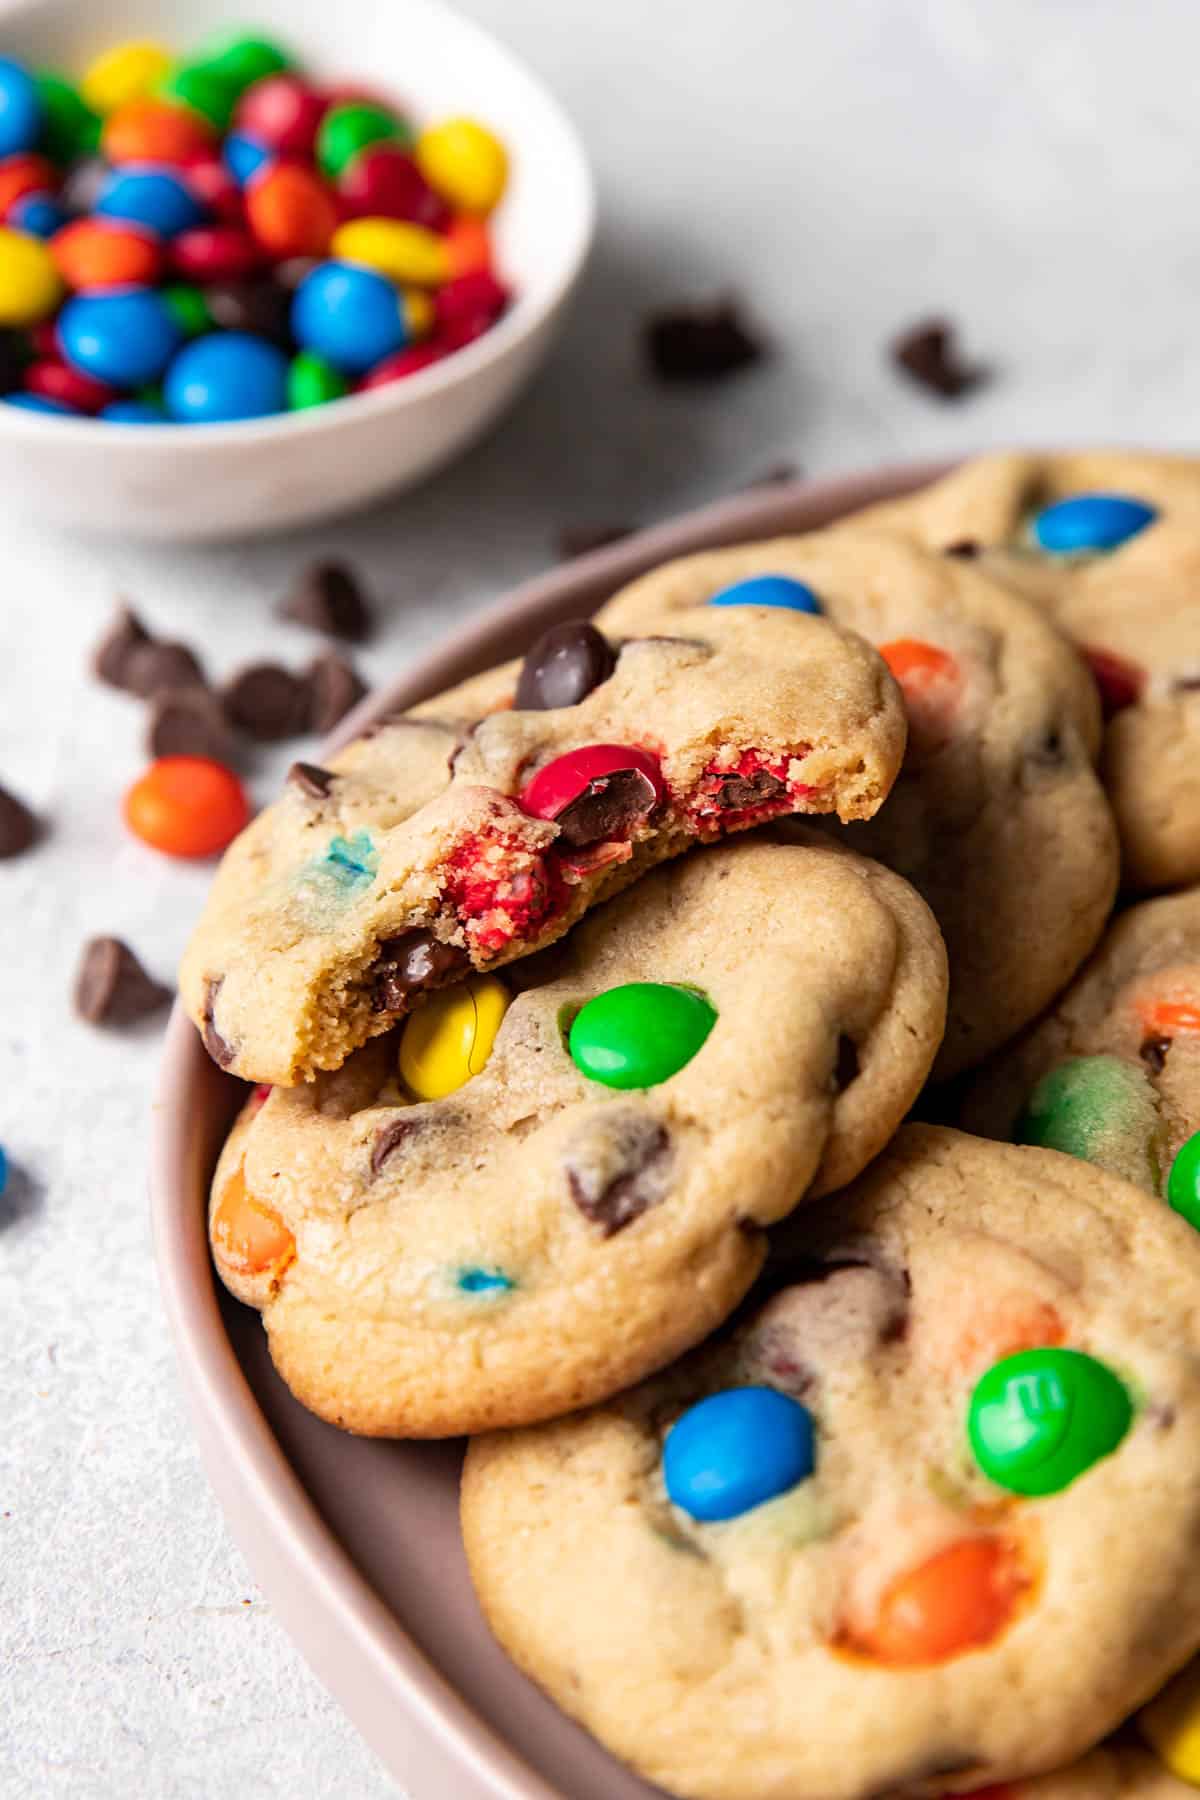 mm cookies on a plate.